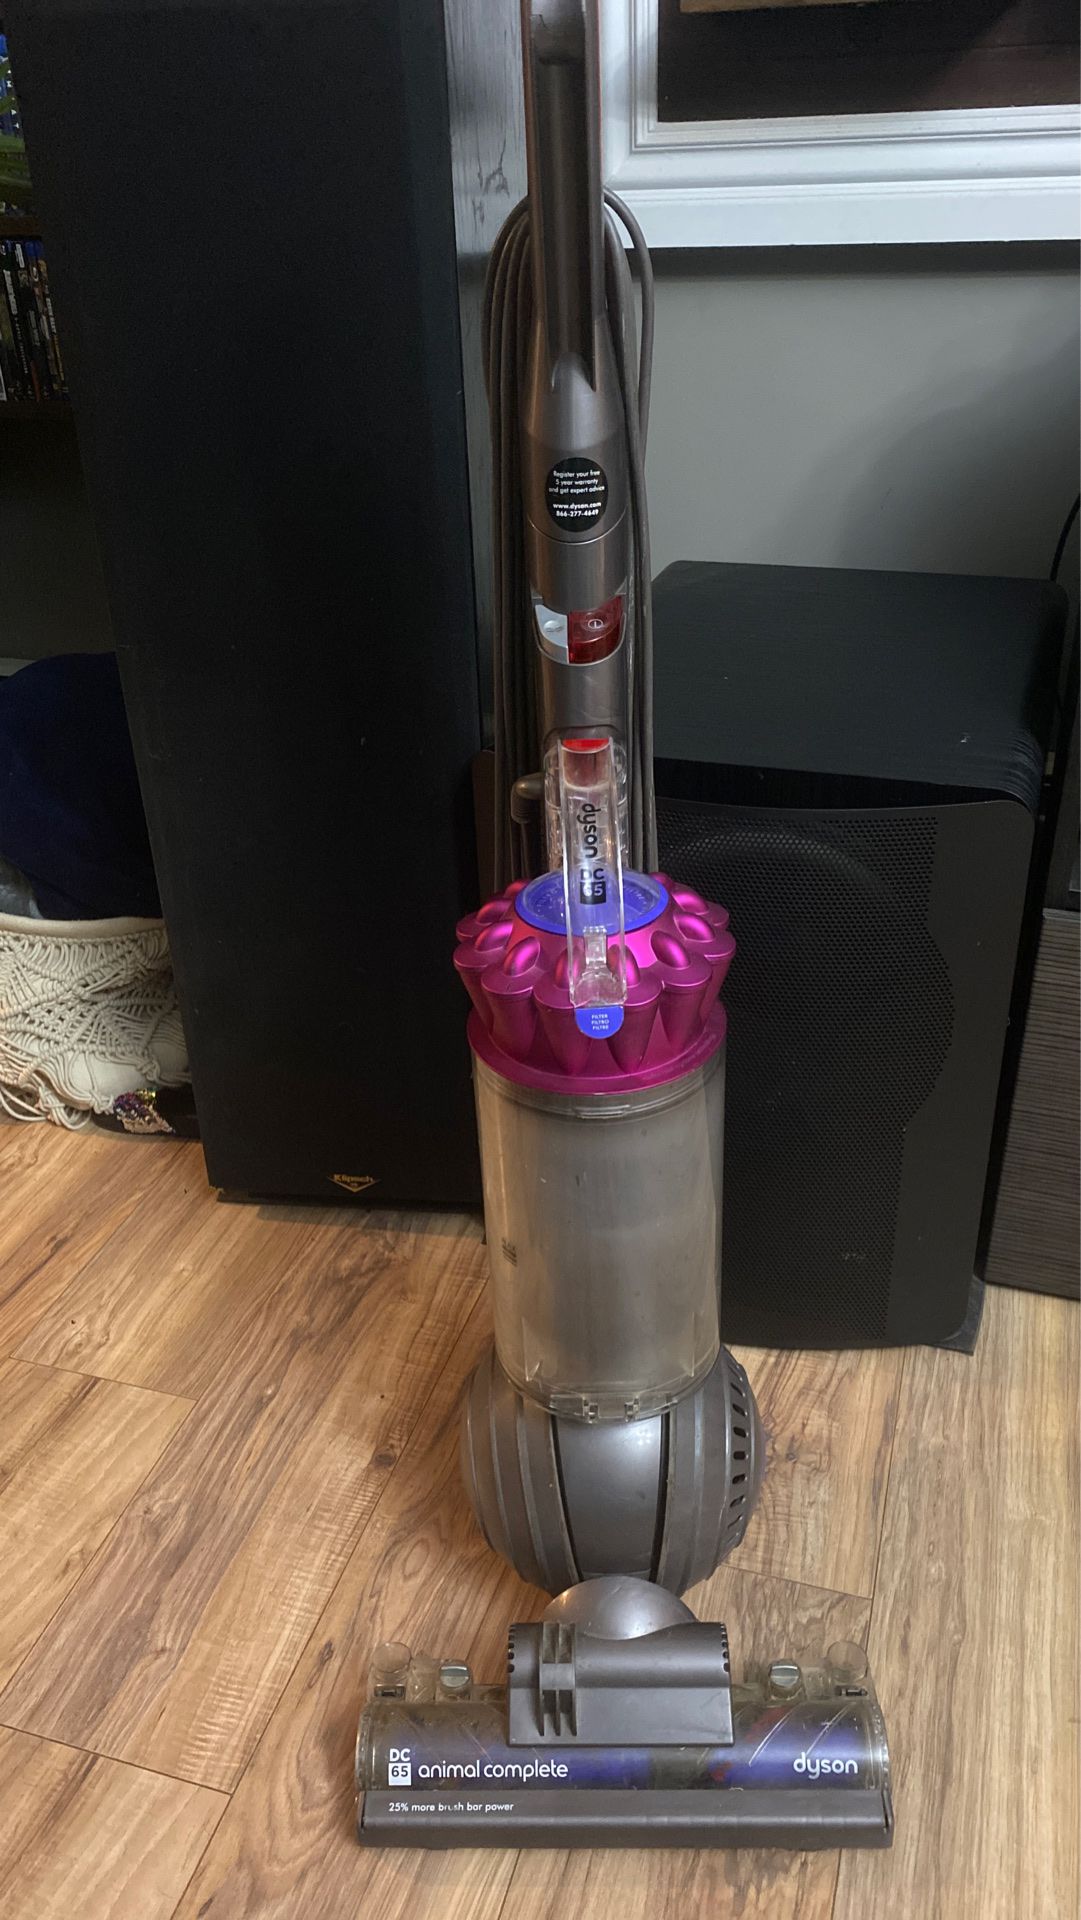 Dyson dc65 used